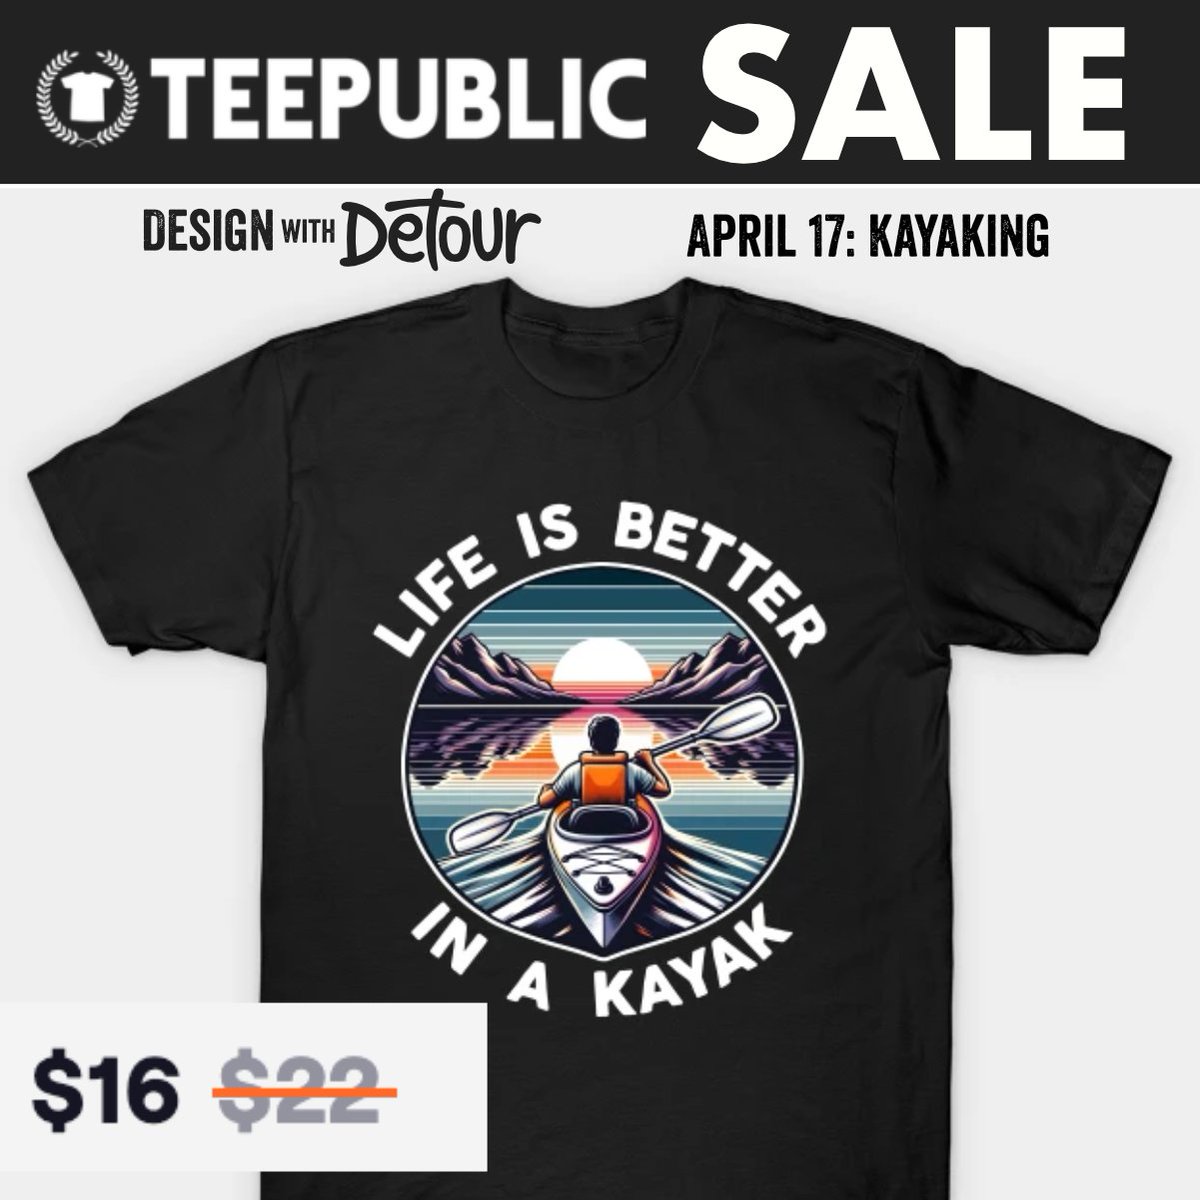 Just added my Kayak design to TeePublic and it's on sale for the next 3 days.

Most of my other Design with Detour t-shirt designs are there too.

Here is the link if you are interested.... teepublic.com/t-shirt/597517…